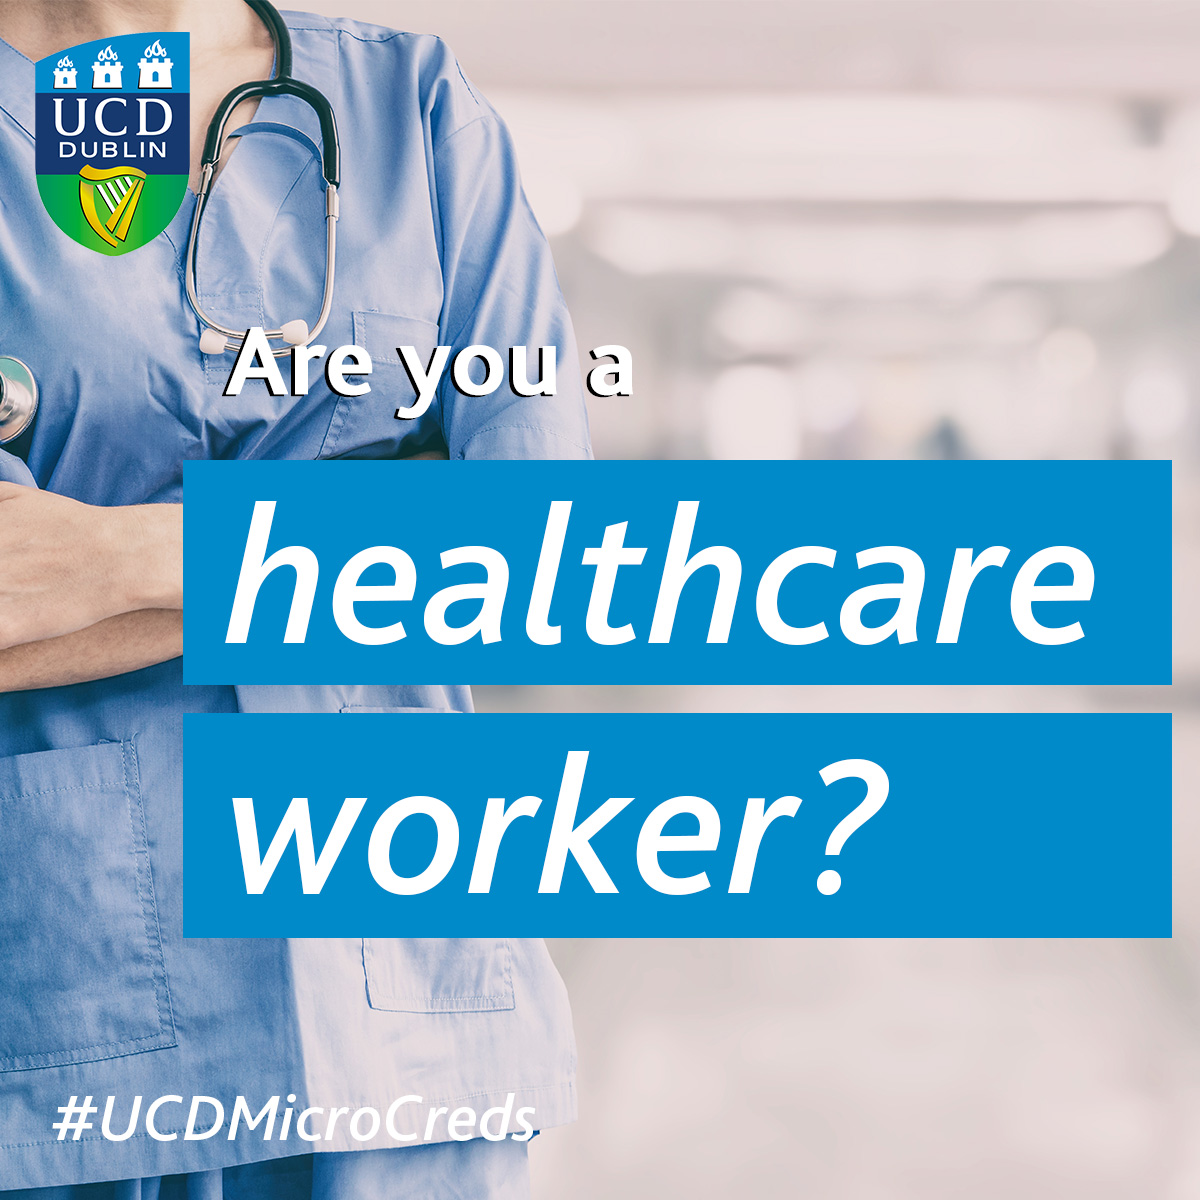 Are you a healthcare worker? Do you want to up-skill in nutrition and/or exercise prescription? Tell us about your learning needs in our short survey below 🙏 @GPbuddy @ICGPnews @ucd_sphpss qfreeaccountssjc1.az1.qualtrics.com/jfe/form/SV_9p… #CPD #learning #HealthcareFuture